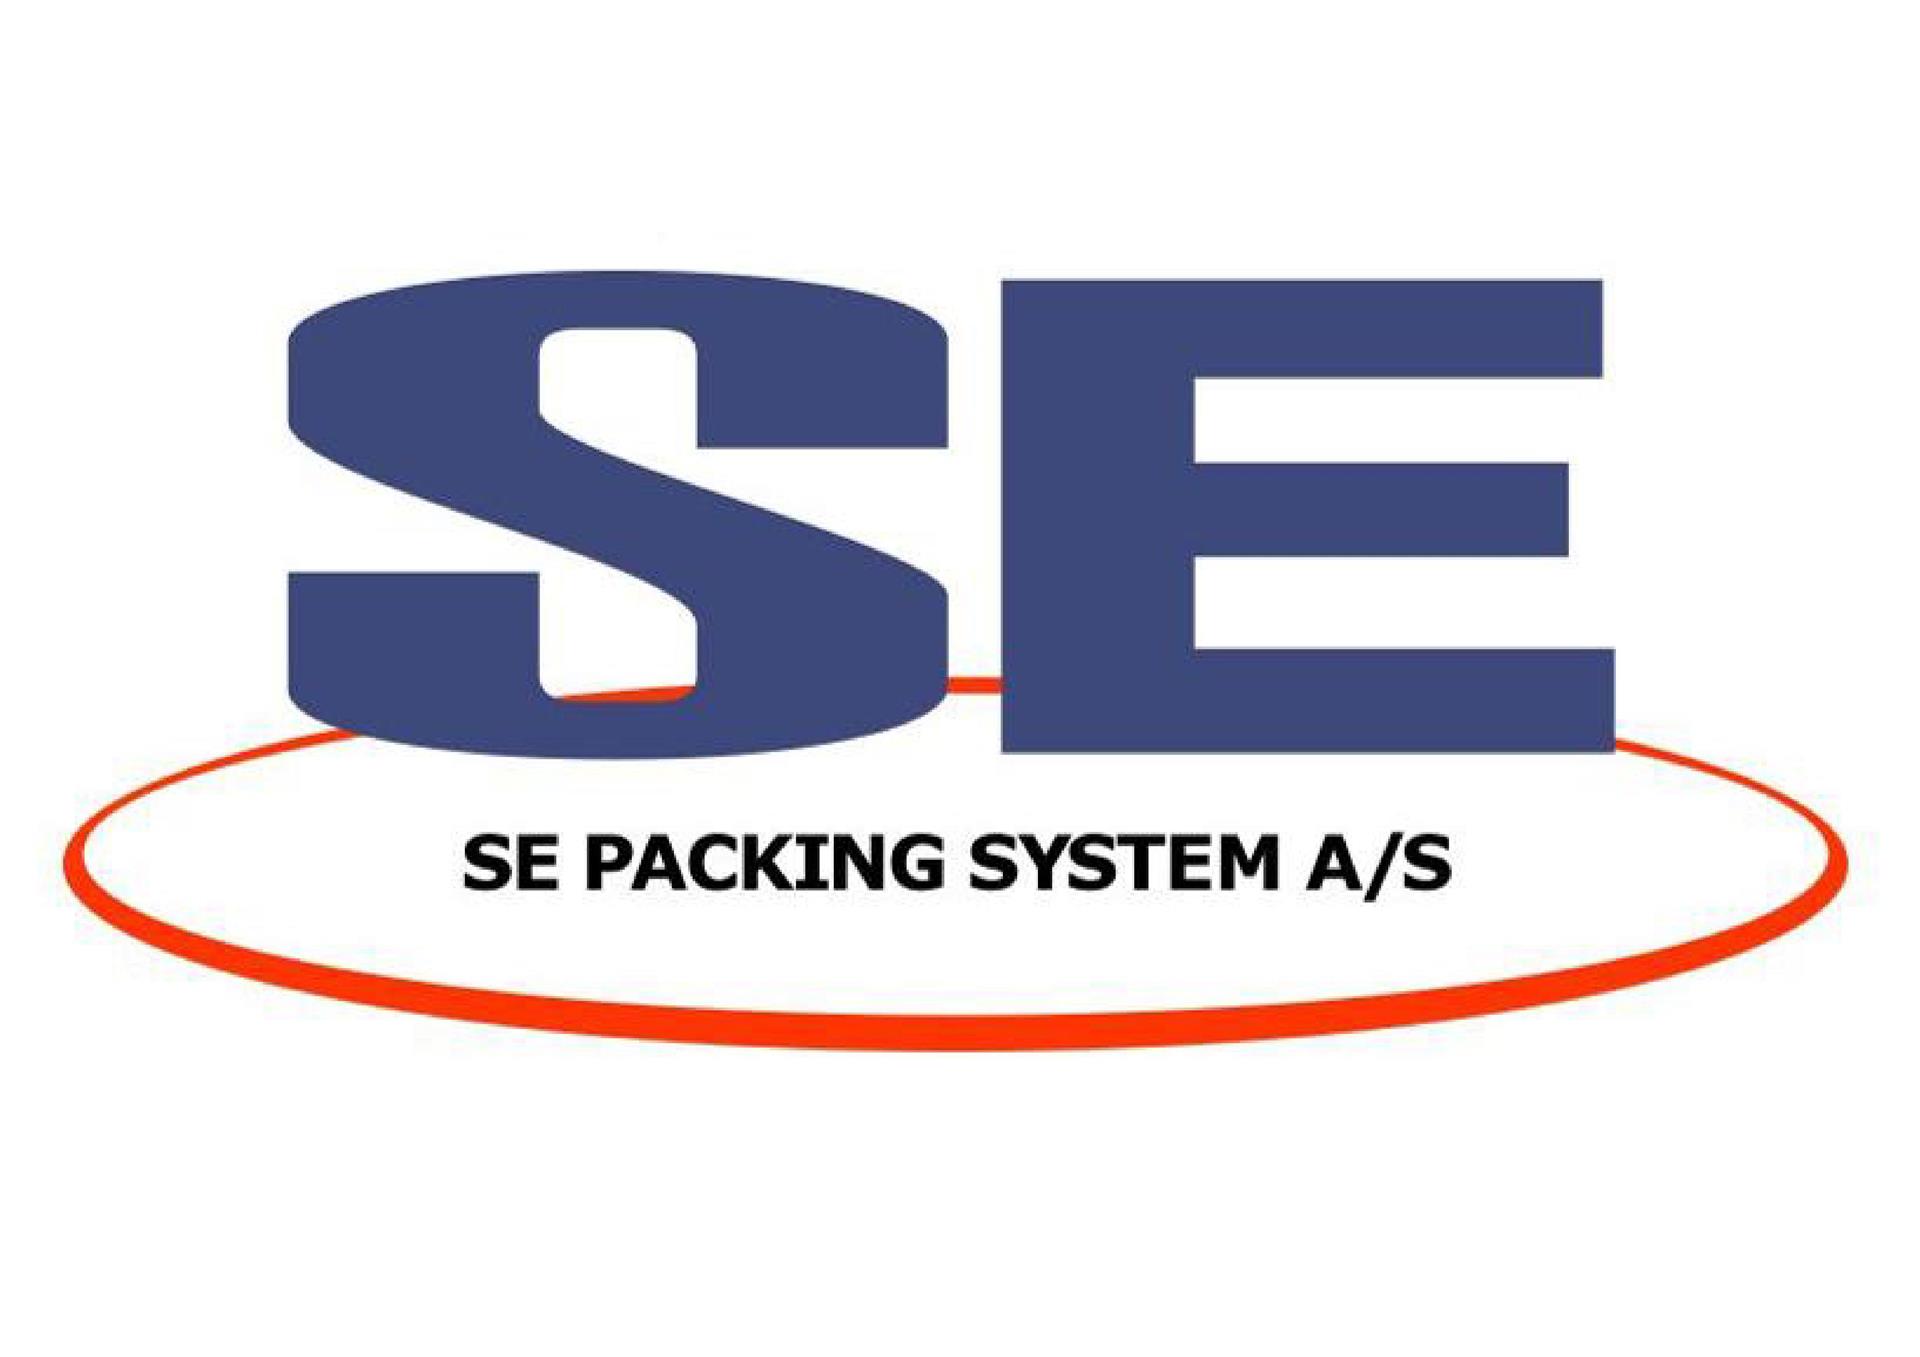 SE Packing A/S